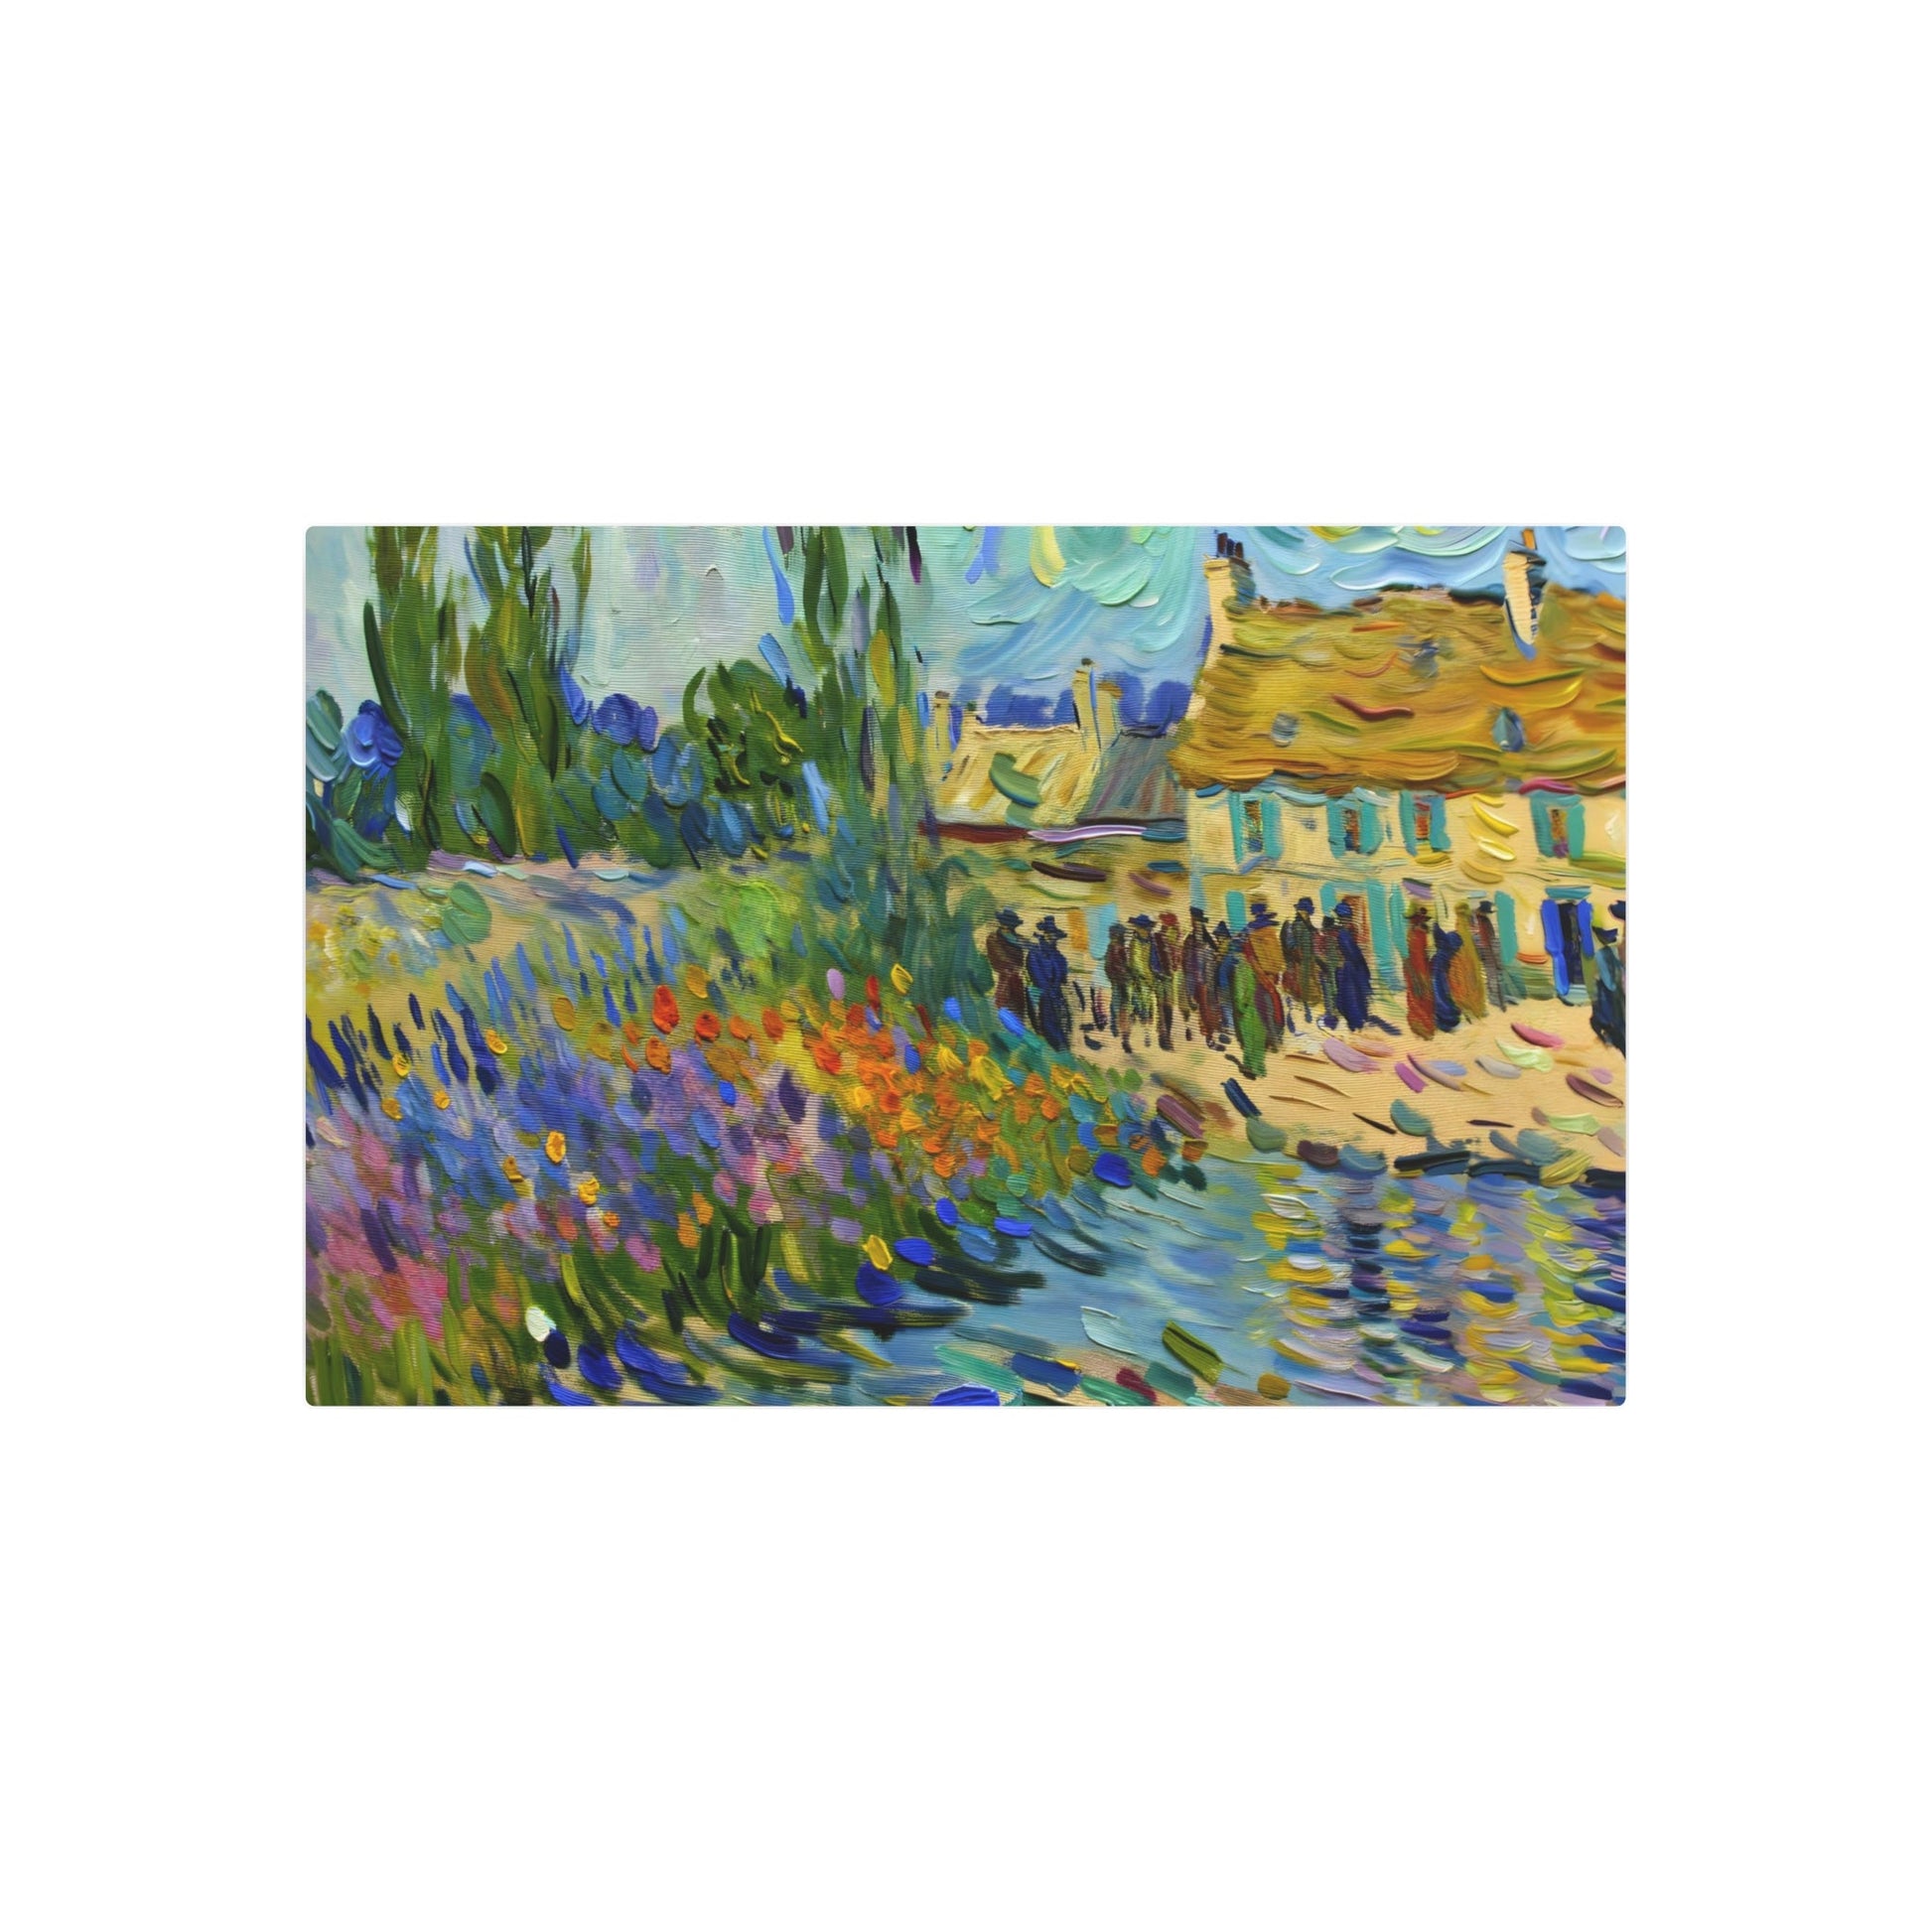 Metal Poster Art | "Post-Impressionism Style Painting: Vivid Colors, Distinctive Brushstrokes Depicting Ordinary Life - Western Art Styles Collection" - Metal Poster Art 36″ x 24″ (Horizontal) 0.12''